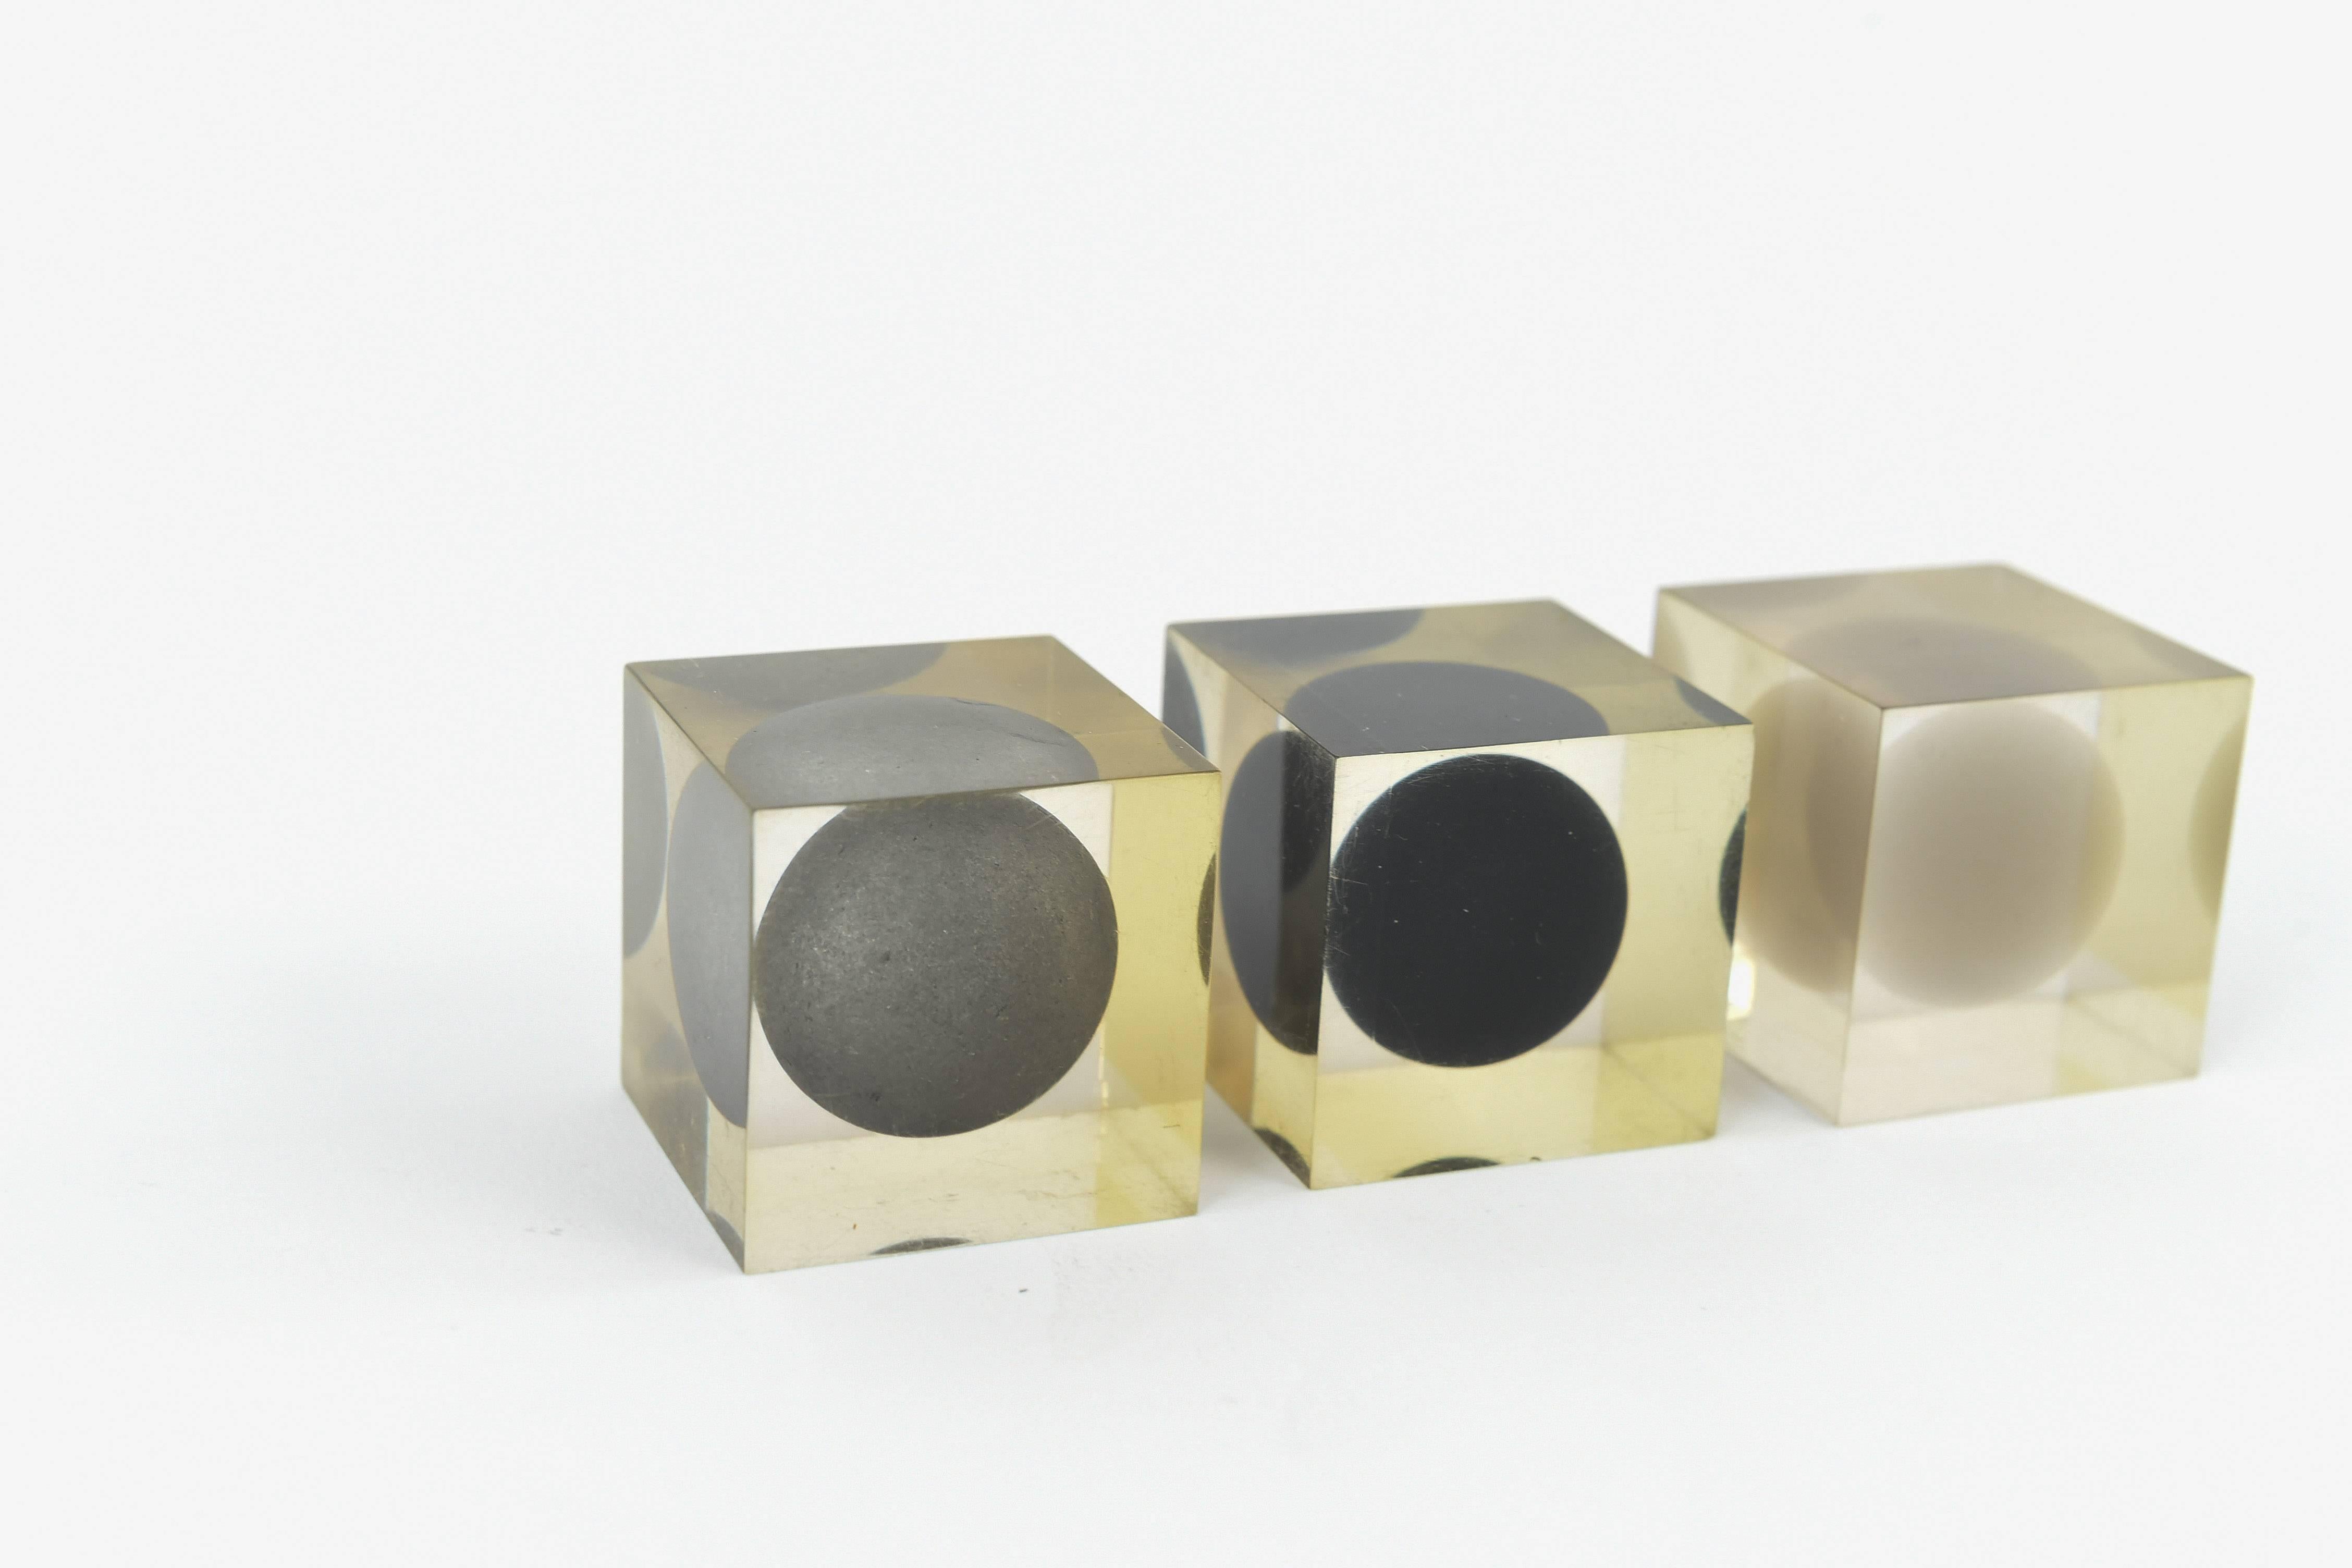 A wonderful selection of three Lucite cube sculptures with encased metal and other spheres.